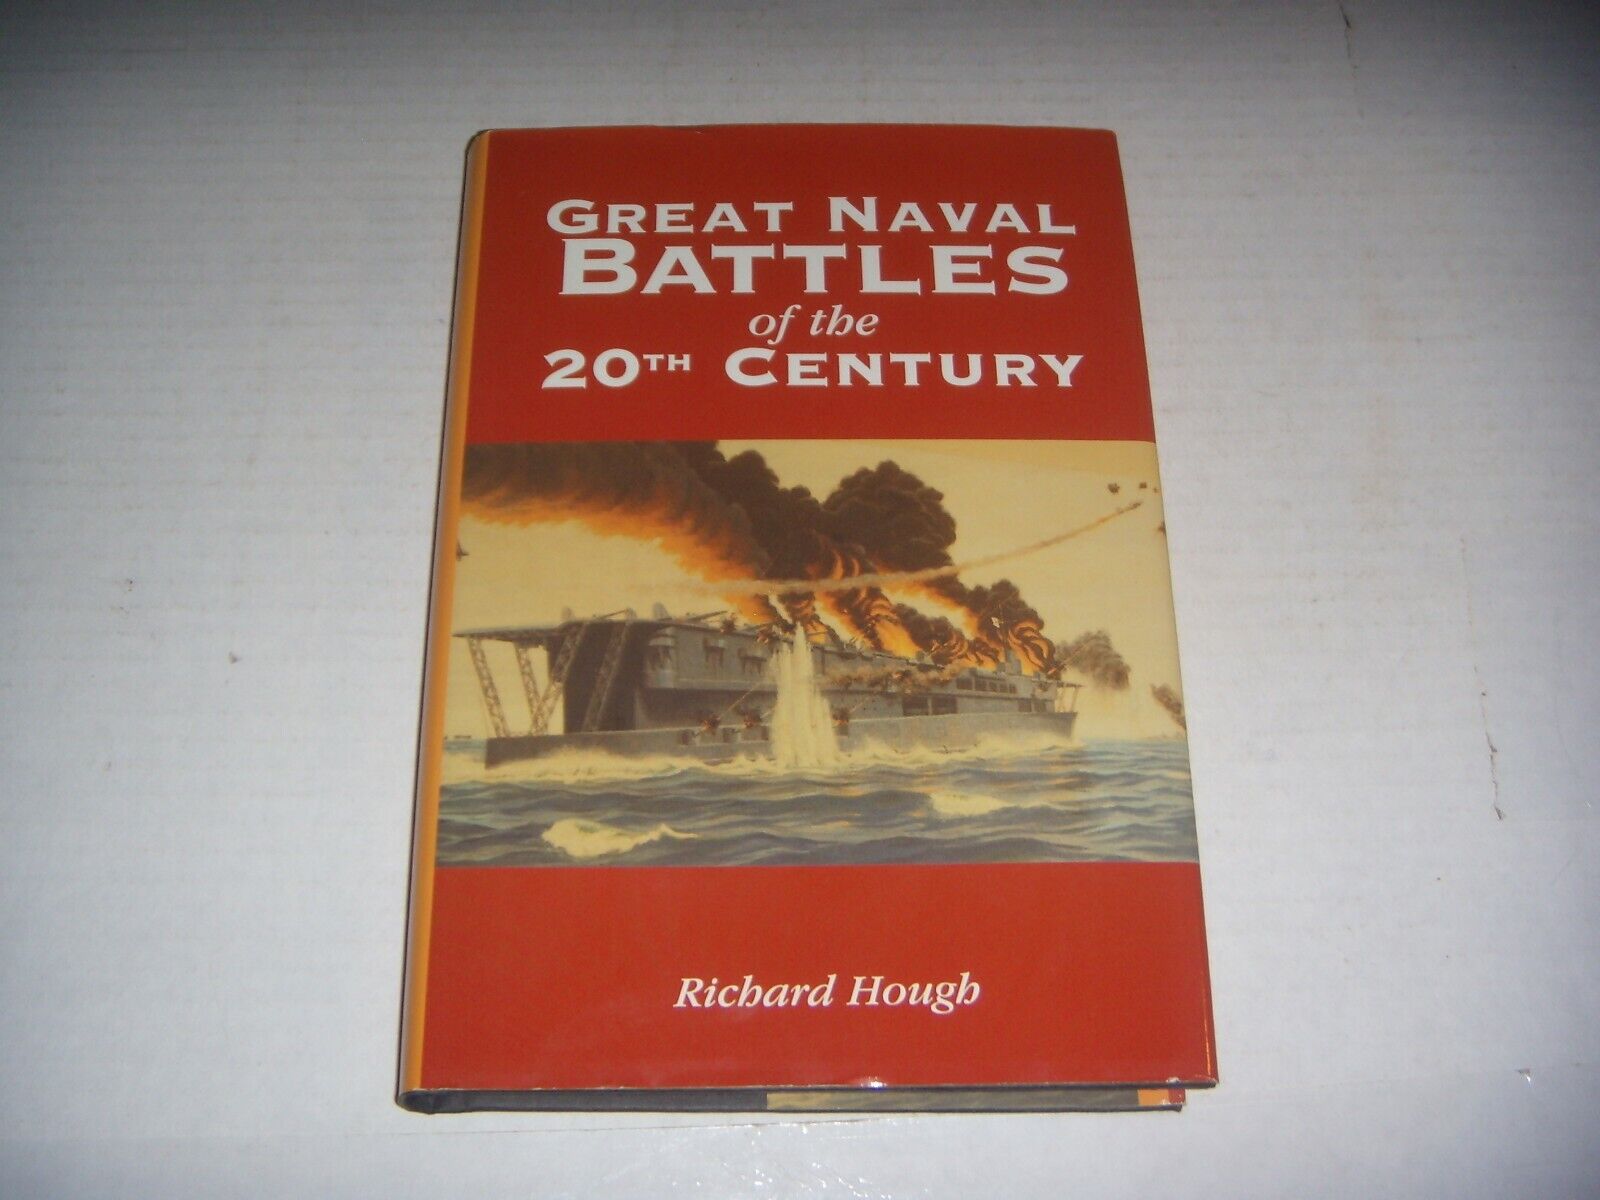 WW1 WW2 Navy Great Naval Battles of the 20th Century Hardcover Reference Book